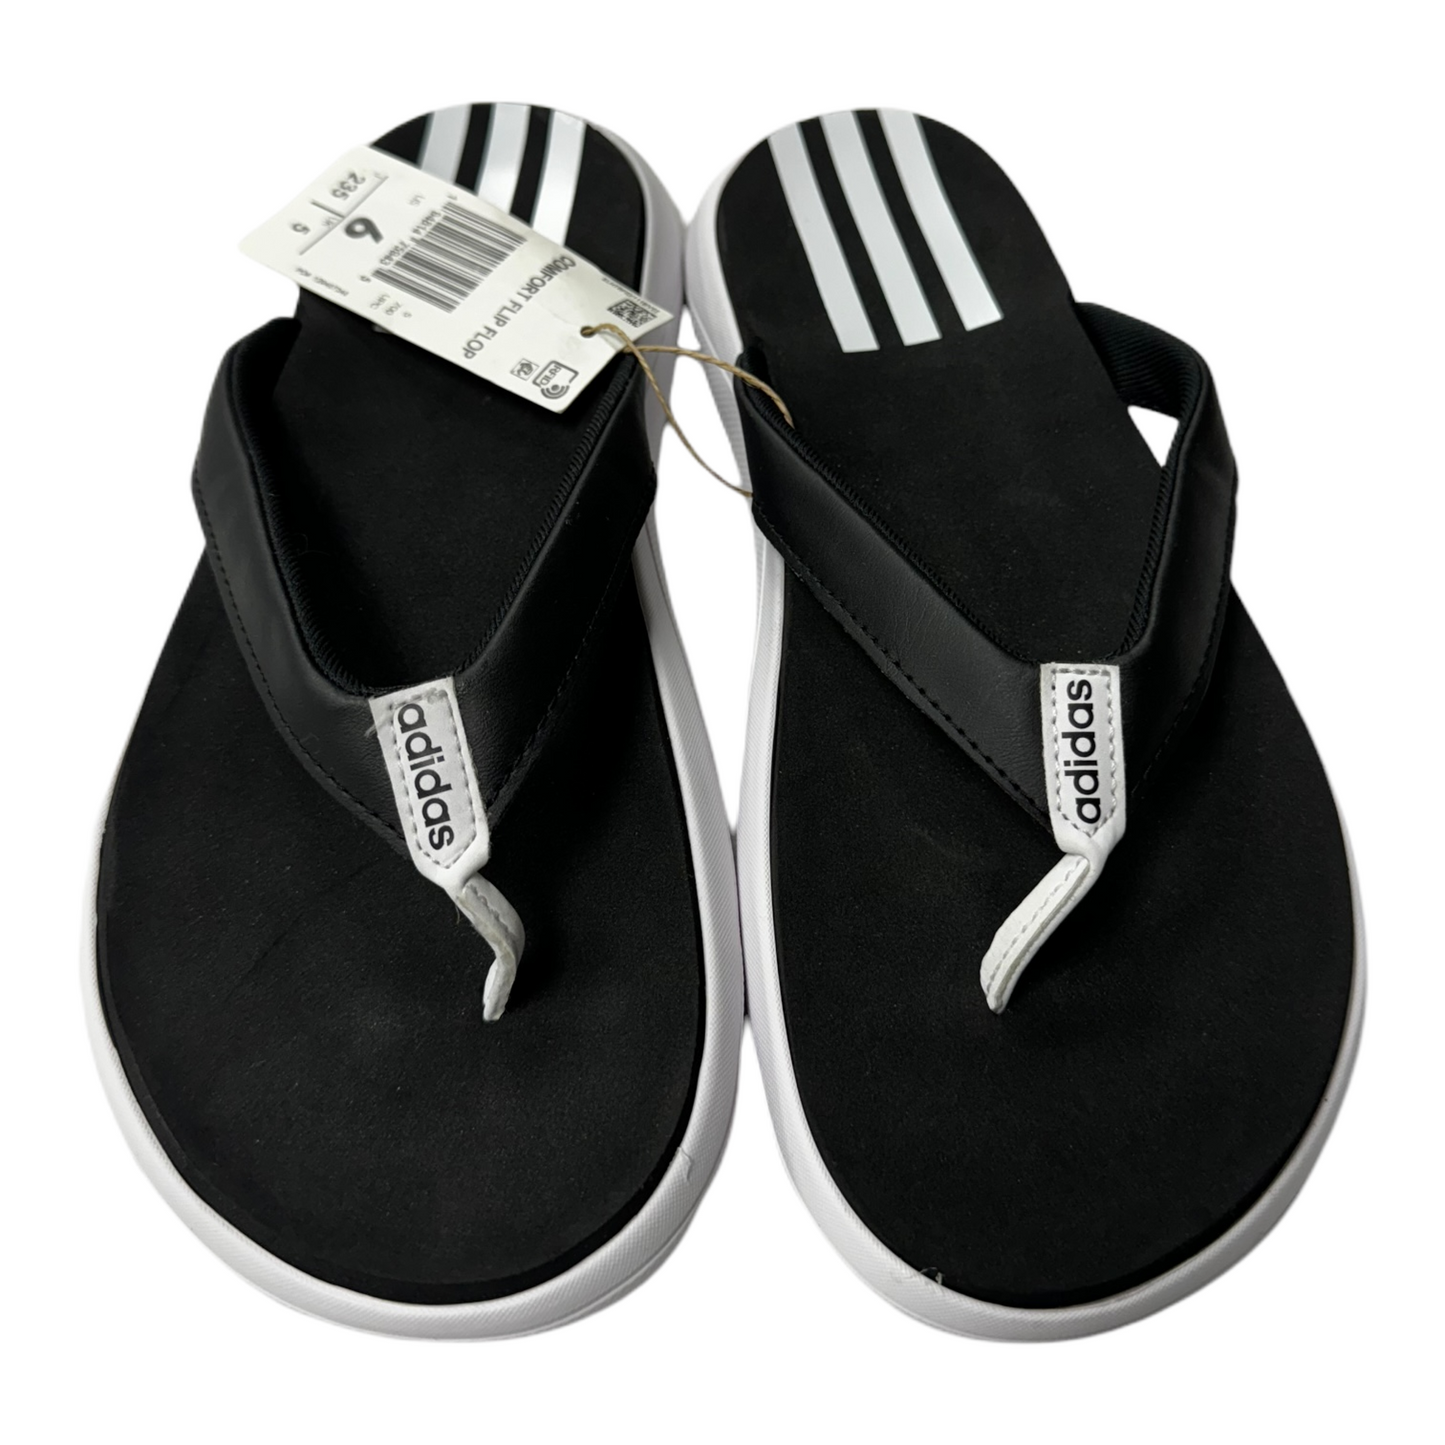 Sandals Flip Flops By Adidas  Size: 6